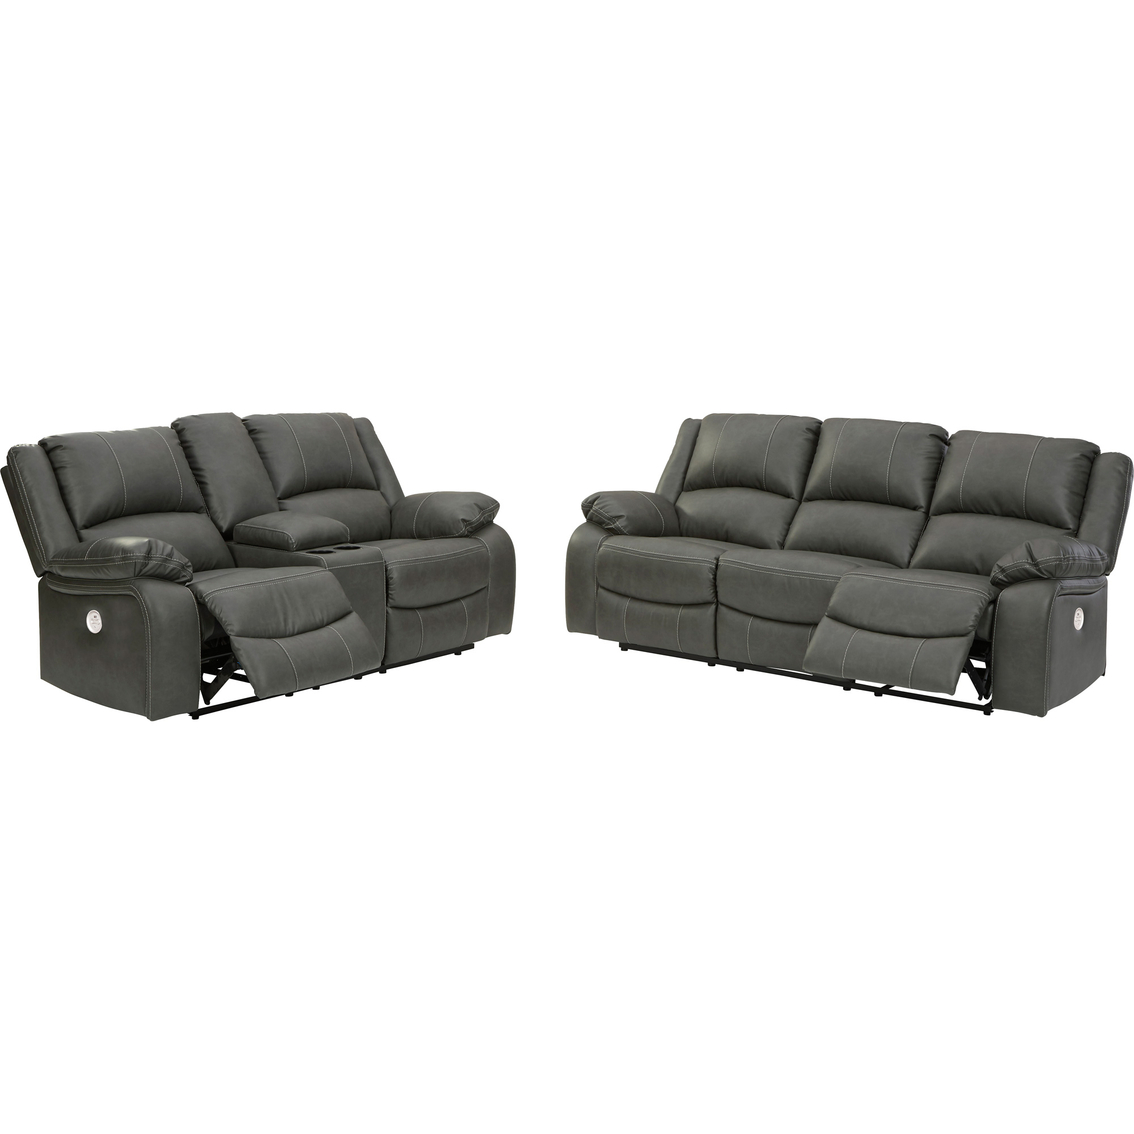 Signature Design by Ashley Caldwell Power Reclining 2 pc. Set